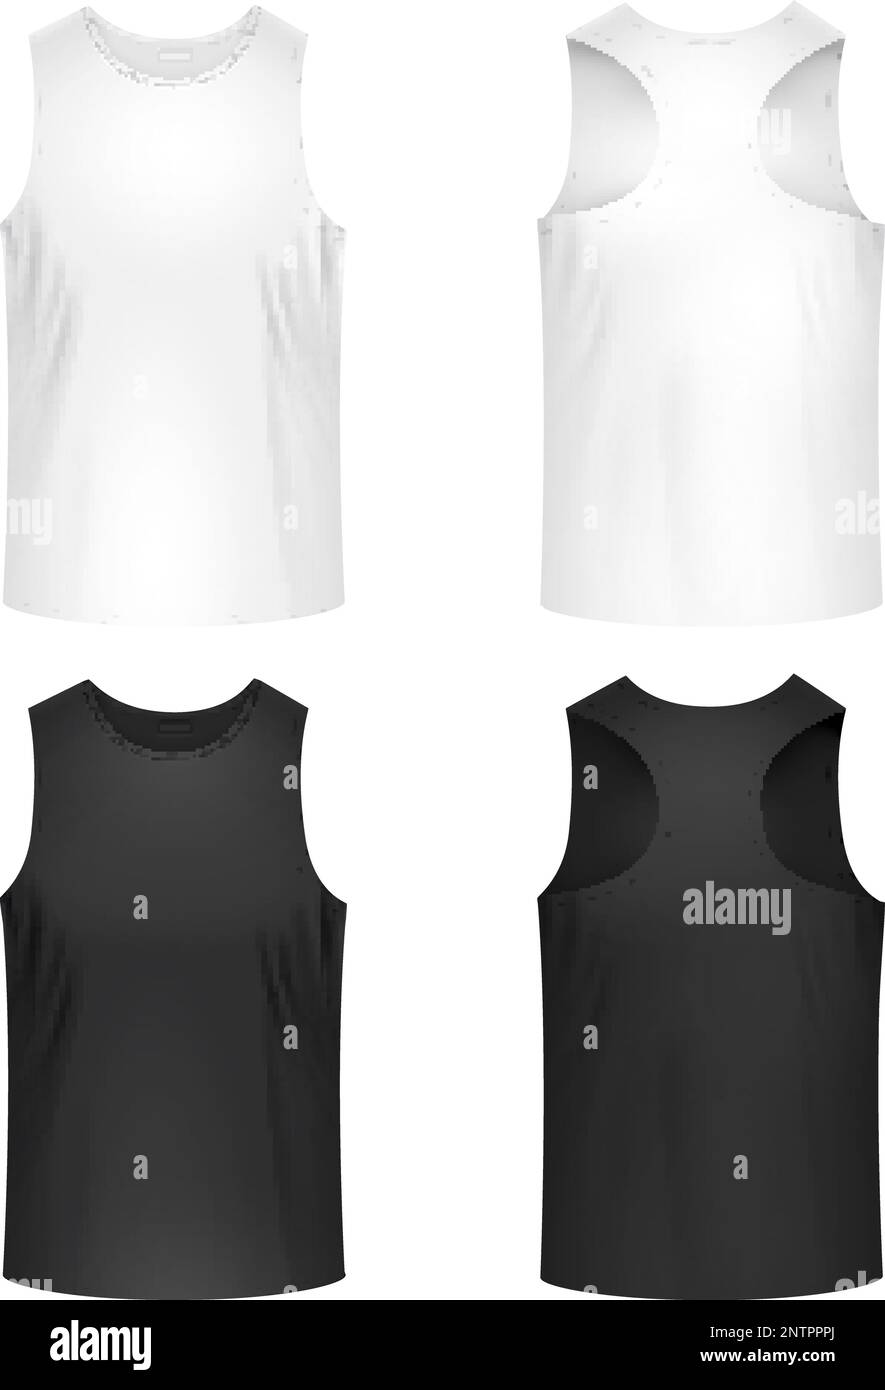 Male sport white and black tank top mockup front and back views ...